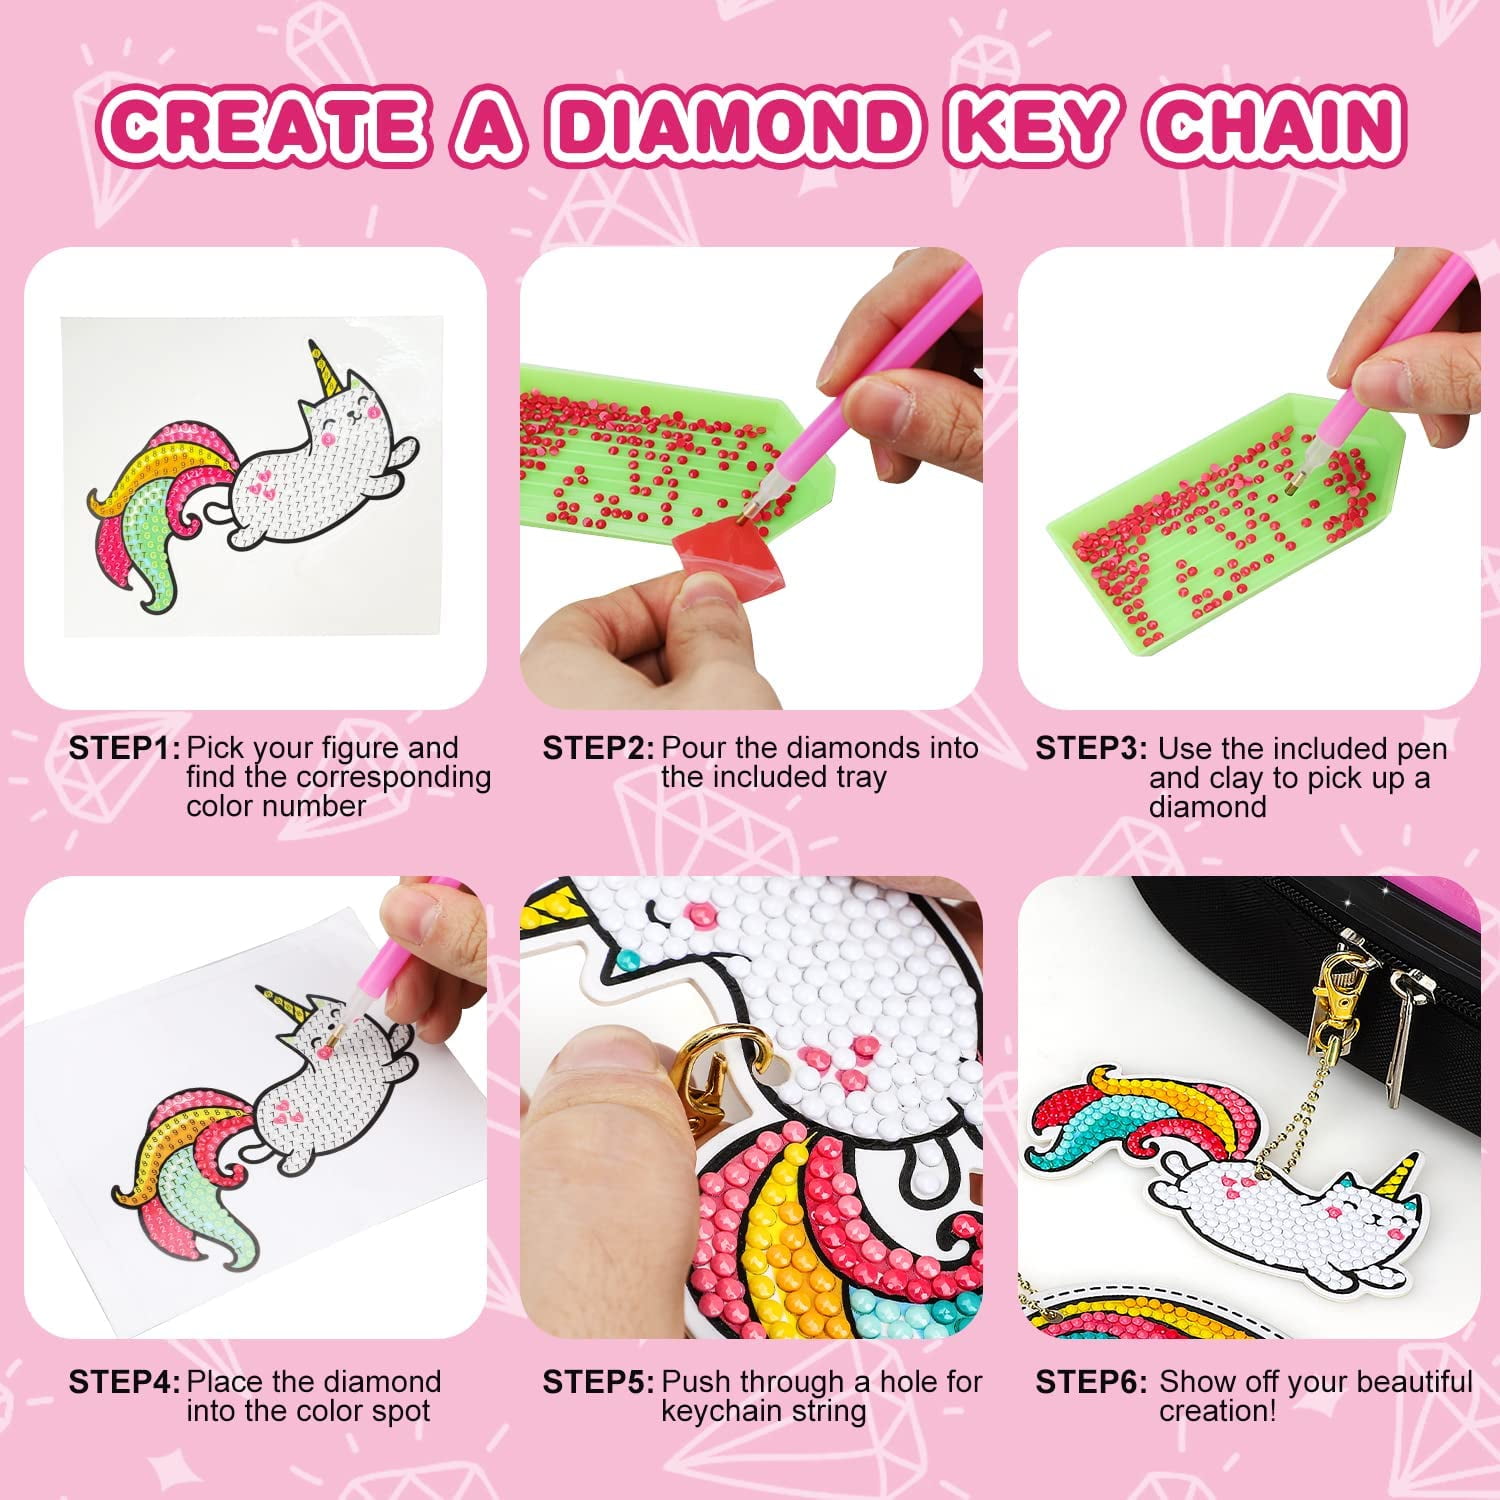 Arts And Crafts For Kids Ages 8-12 - Make Your Own Gem Keychains - 5d  Diamond Painting By Numbers Art Kits For Girls Kids Toddler Ages 3-5 4-6 6-8